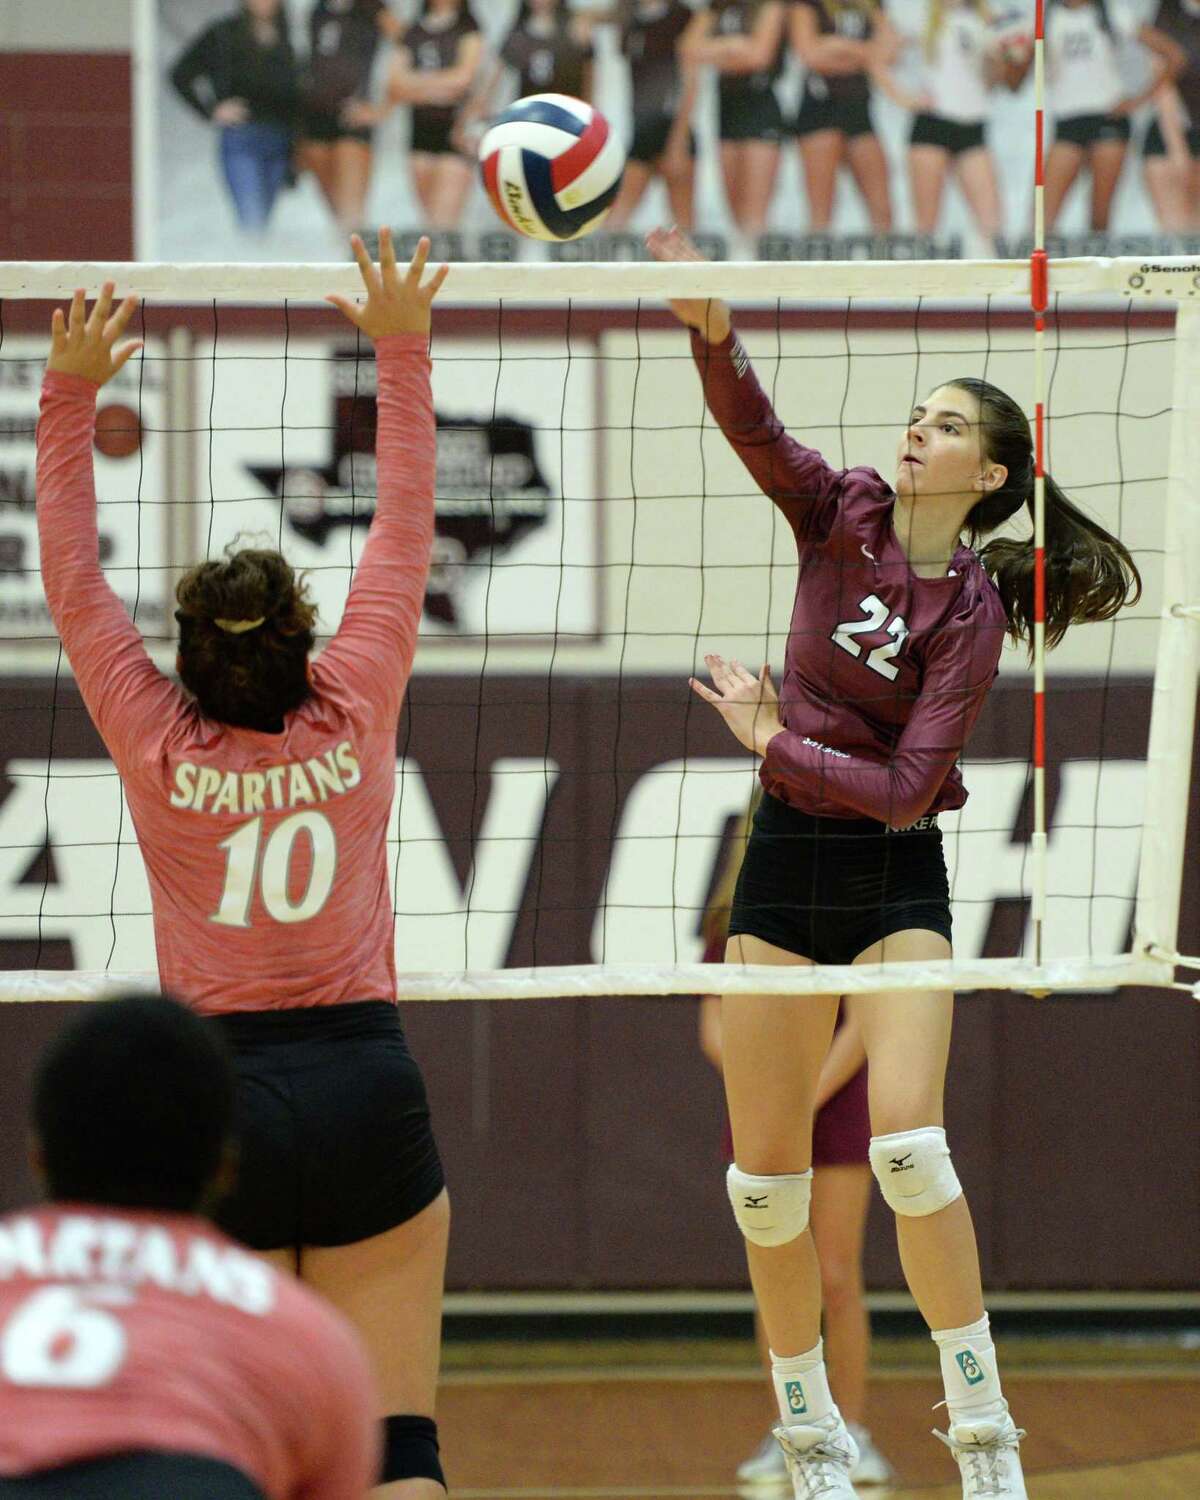 Camryn Griffin (22) of Cinco Ranch attempts a kill shot during the first set of a volleyball match between the Cinco Ranch Cougars and the Cy Lakes Spartans on Friday, August 9, 2019 at Cinco Ranch HS, Katy, TX.